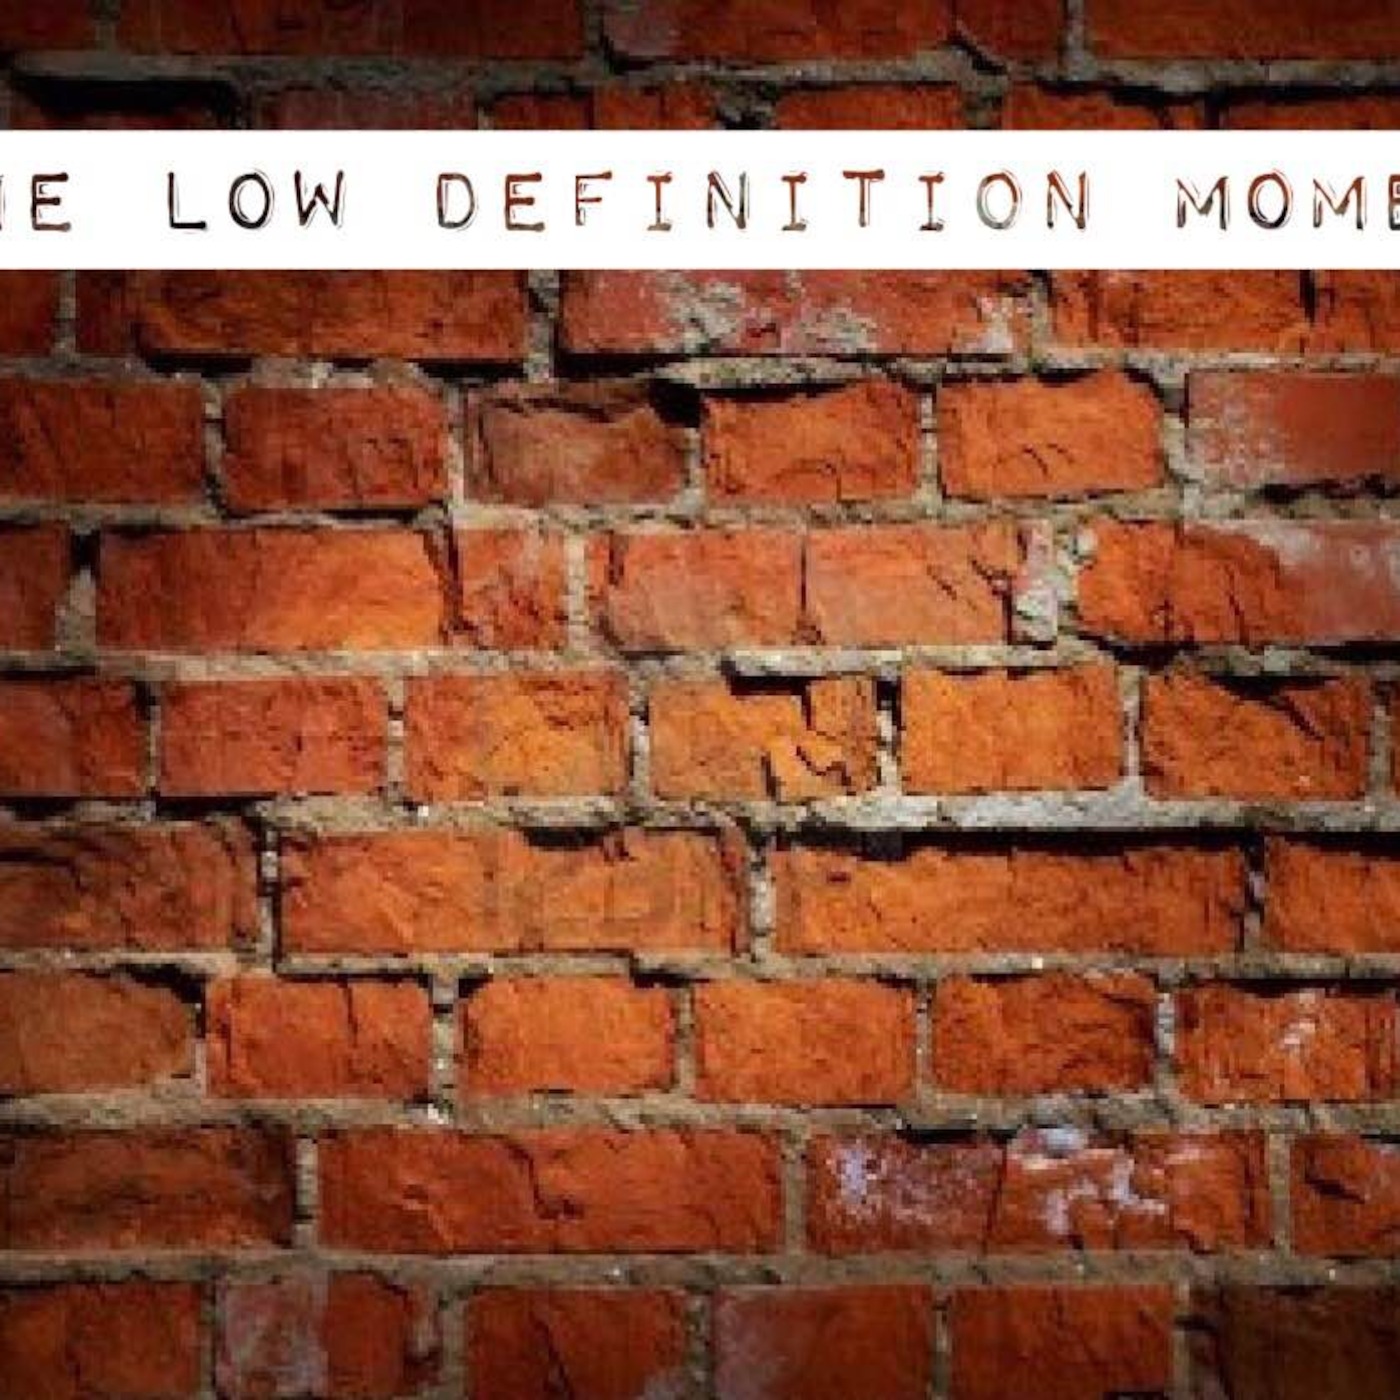 The Low Definition Moment